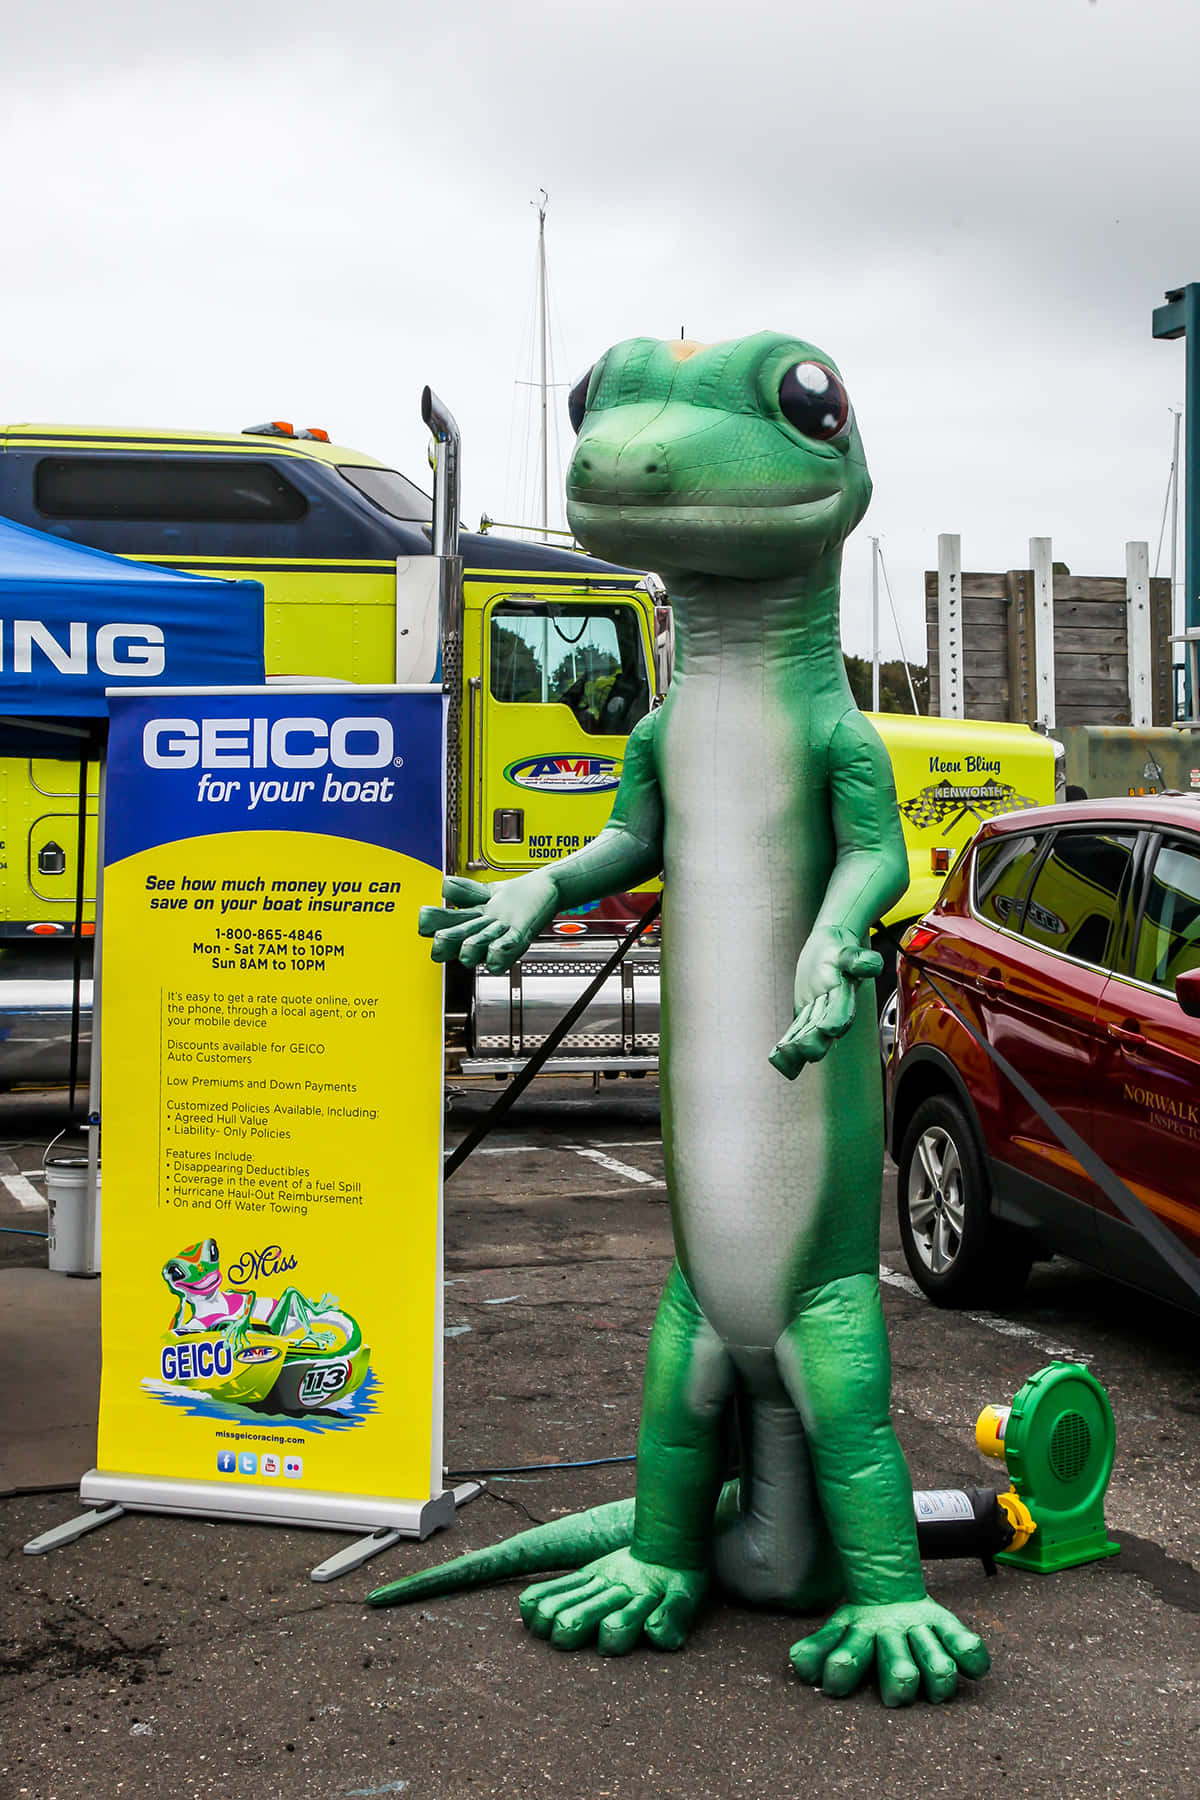 “Secure your peace of mind with Geico Insurance”